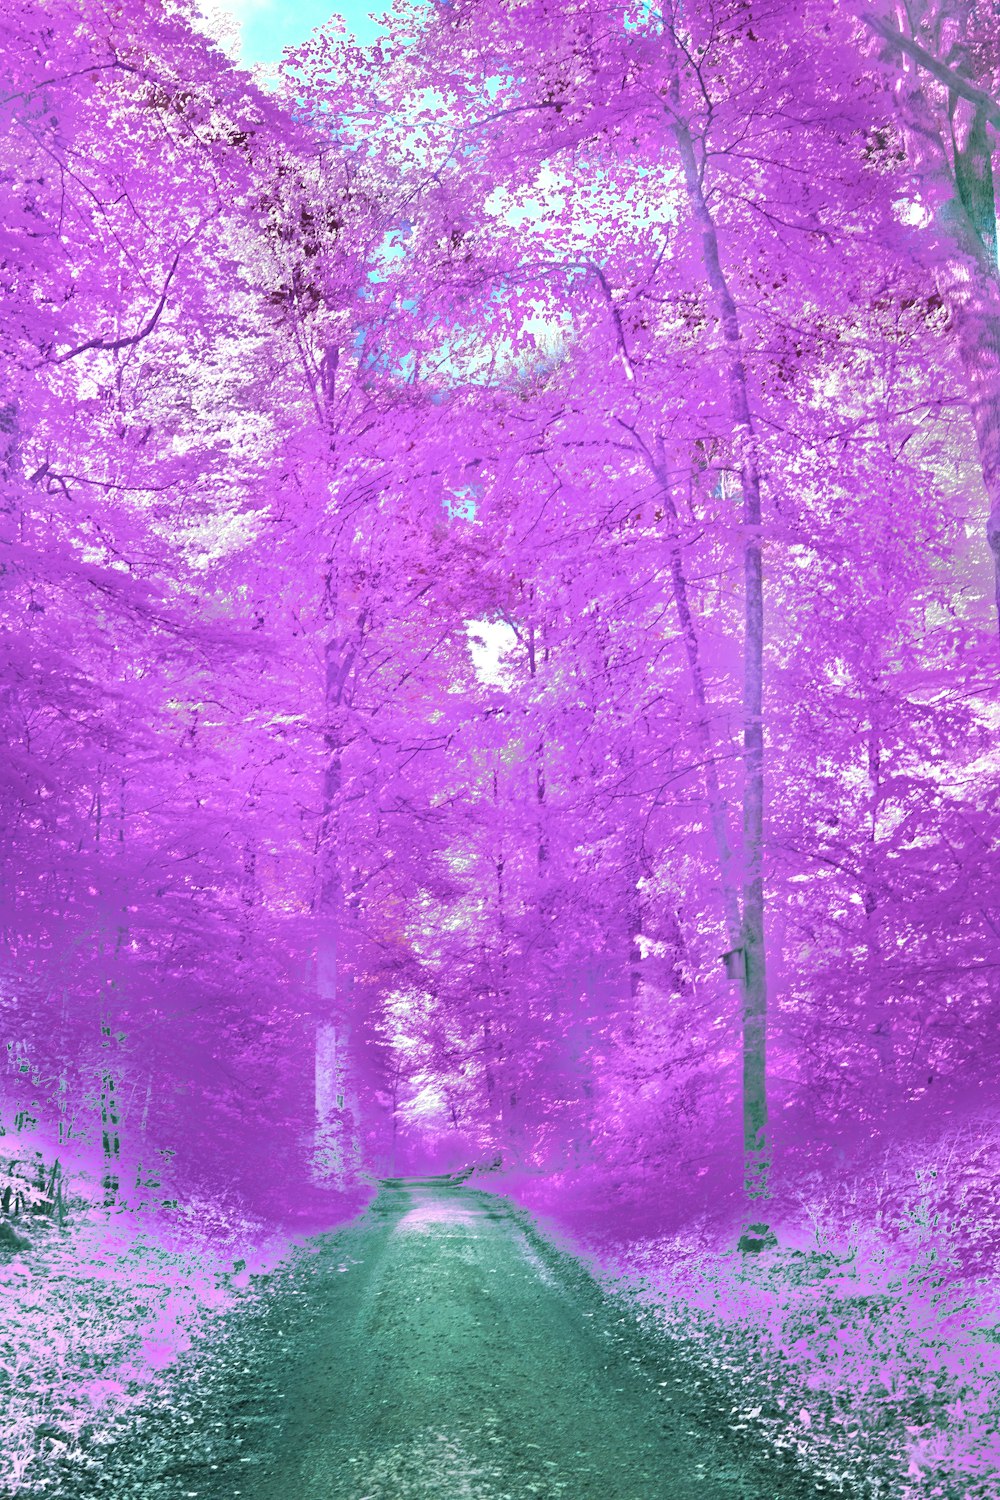 a road in the middle of a purple forest